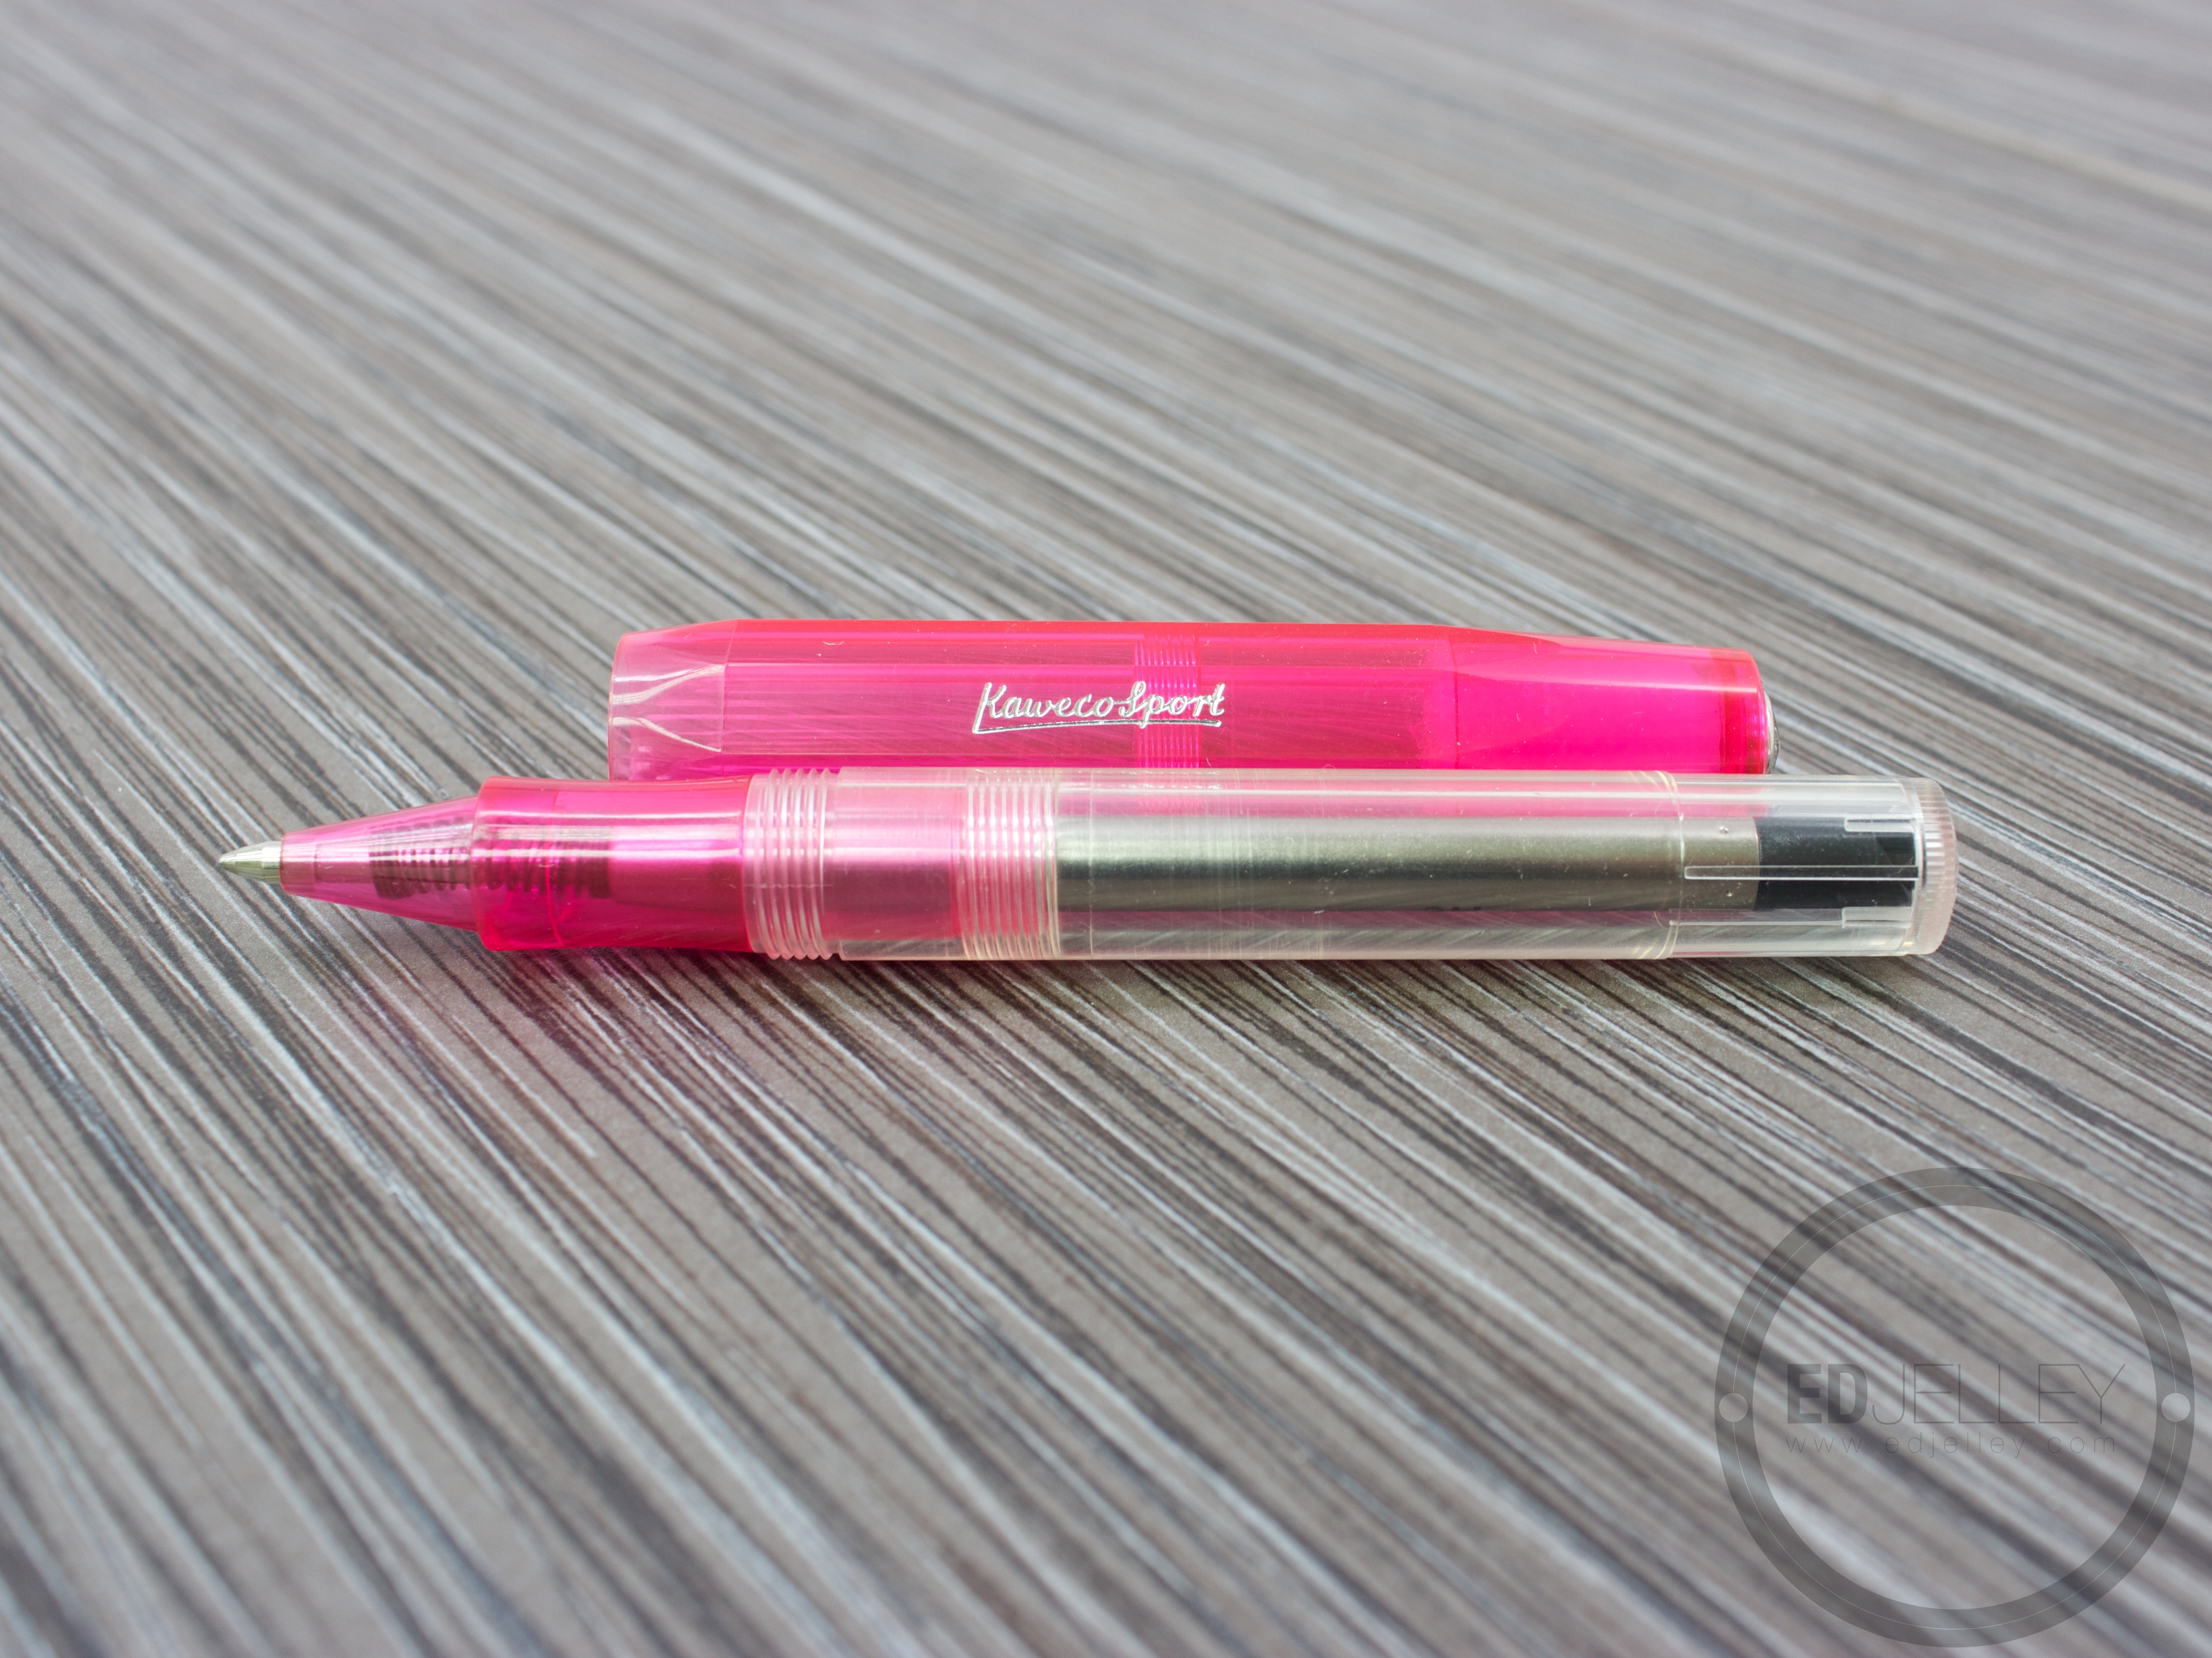 Kaweco ICE Sport Rollerball Pen Review